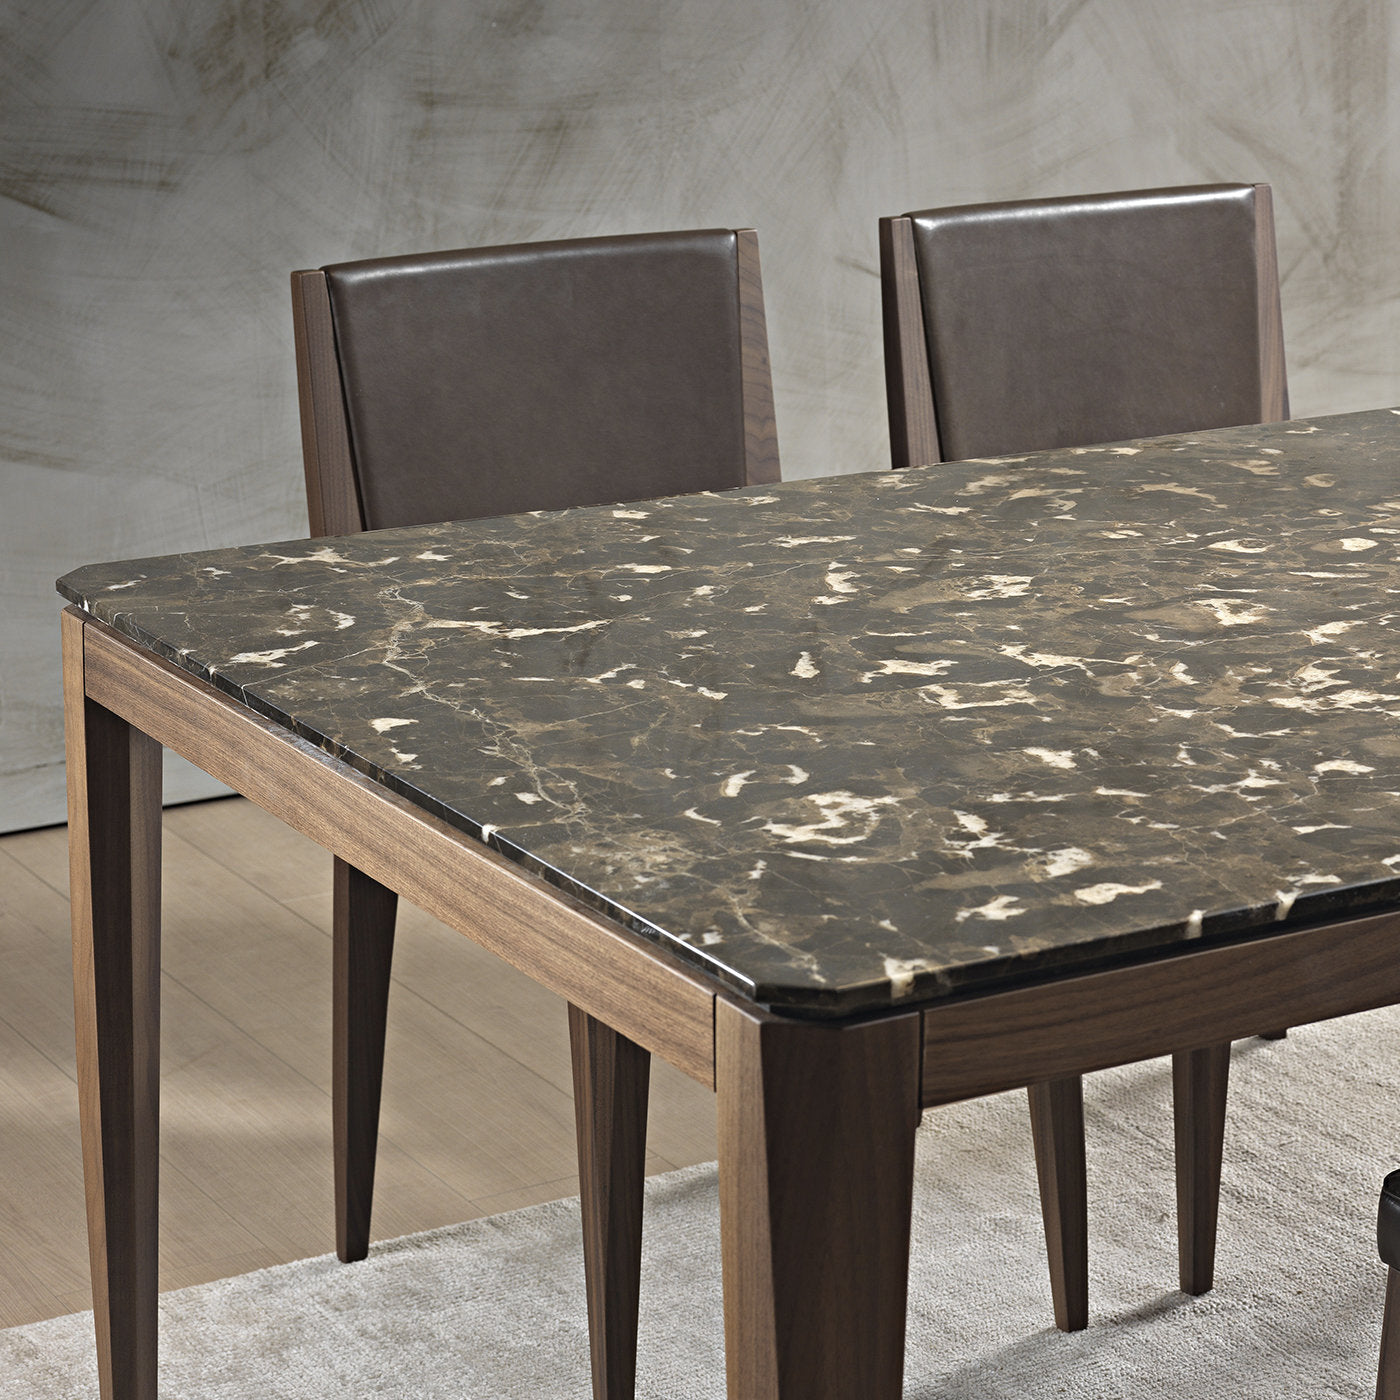 Cut Dining Table with Emperador Marble Top - Alternative view 1